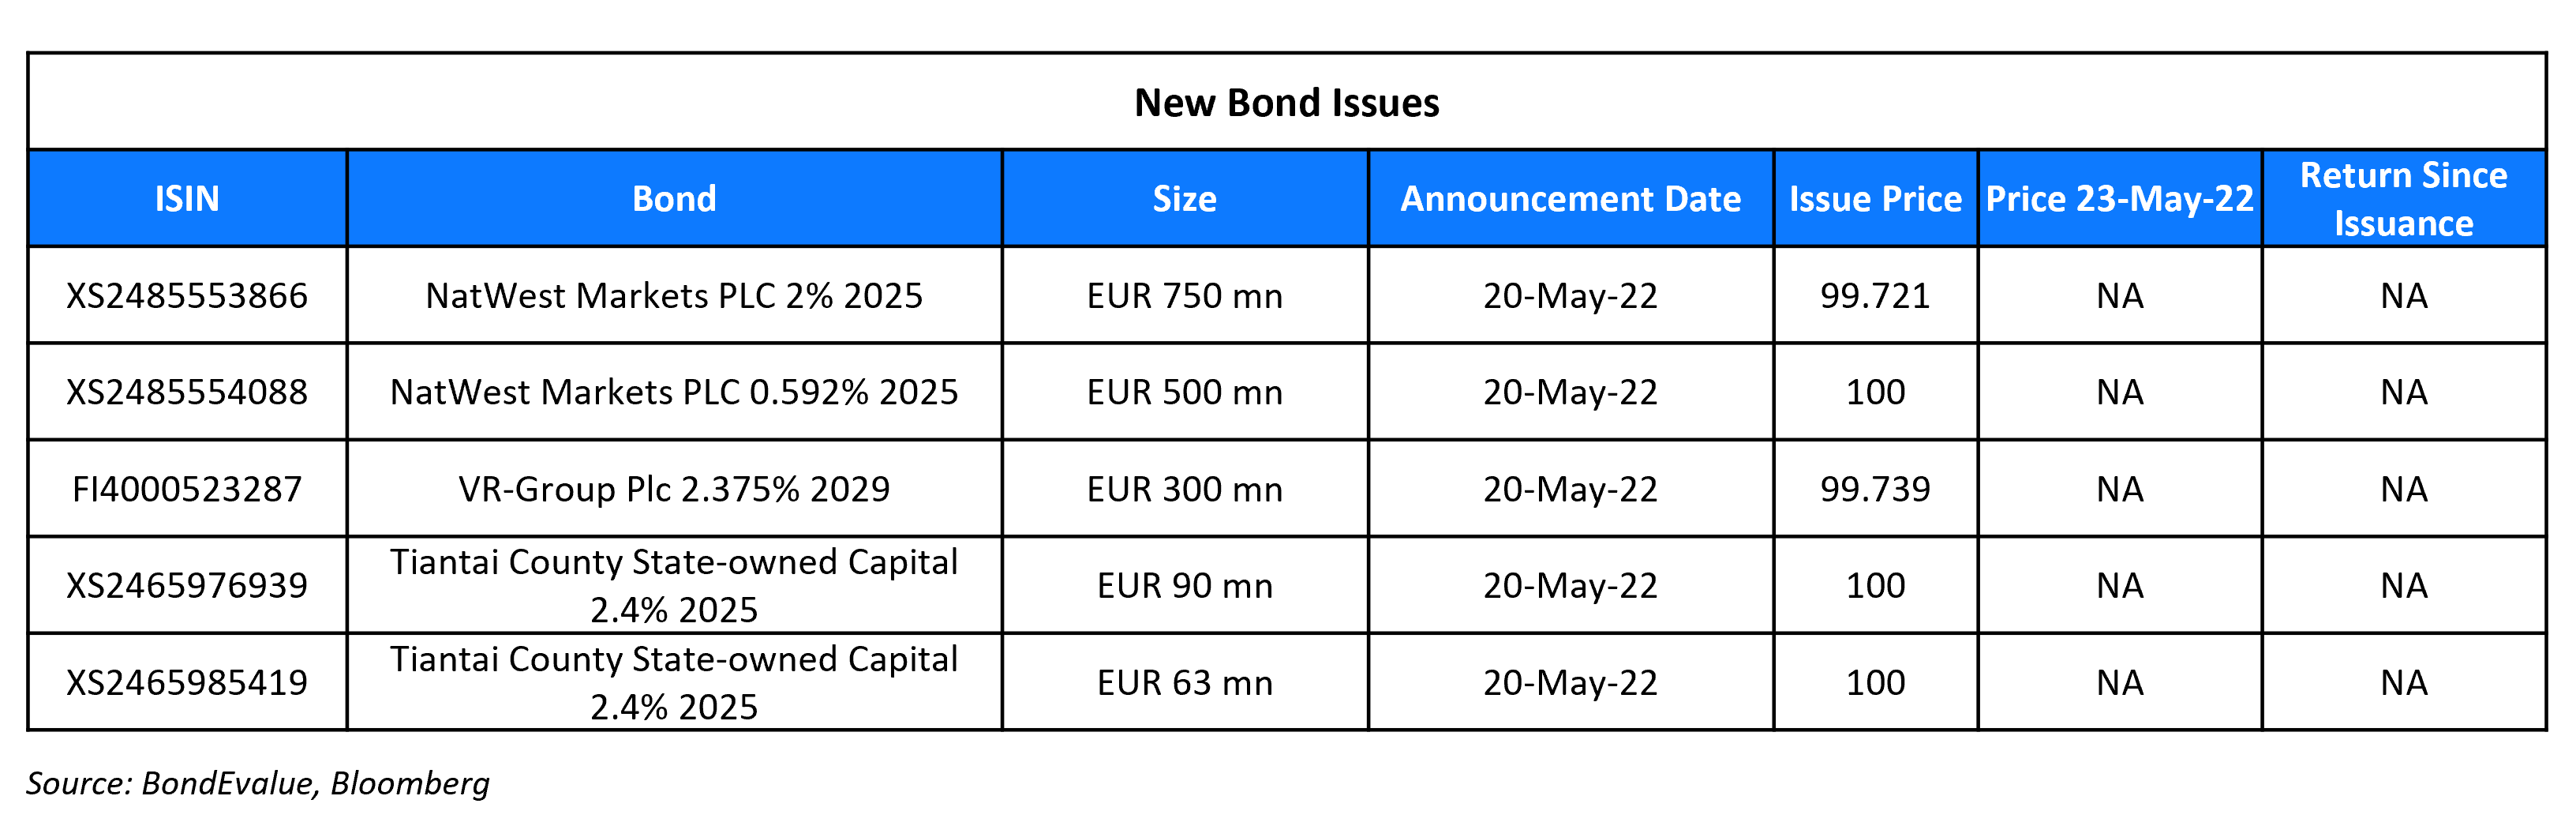 New Bond Issues 23 May 22